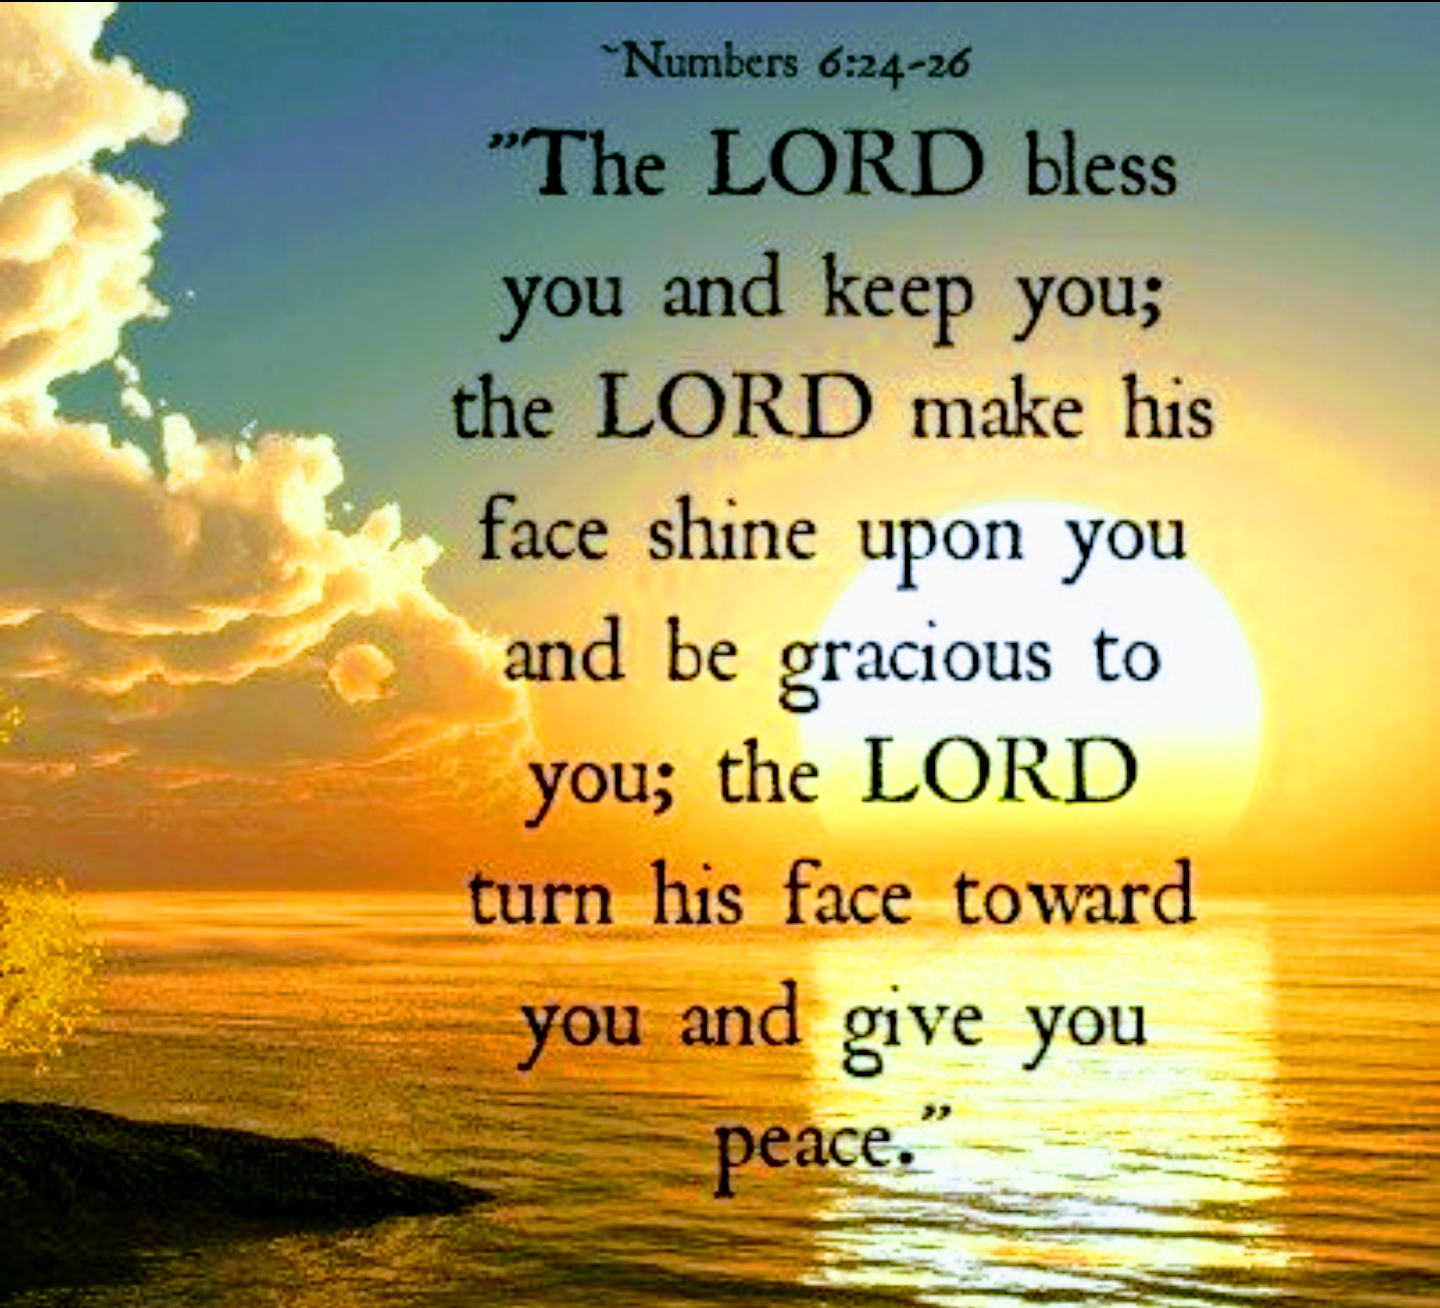 The Lord Bless Thee And Keep Thee The Lord Make His Face Shine Upon Thee And Be Gracious Unto By Keith Mcgivern Medium